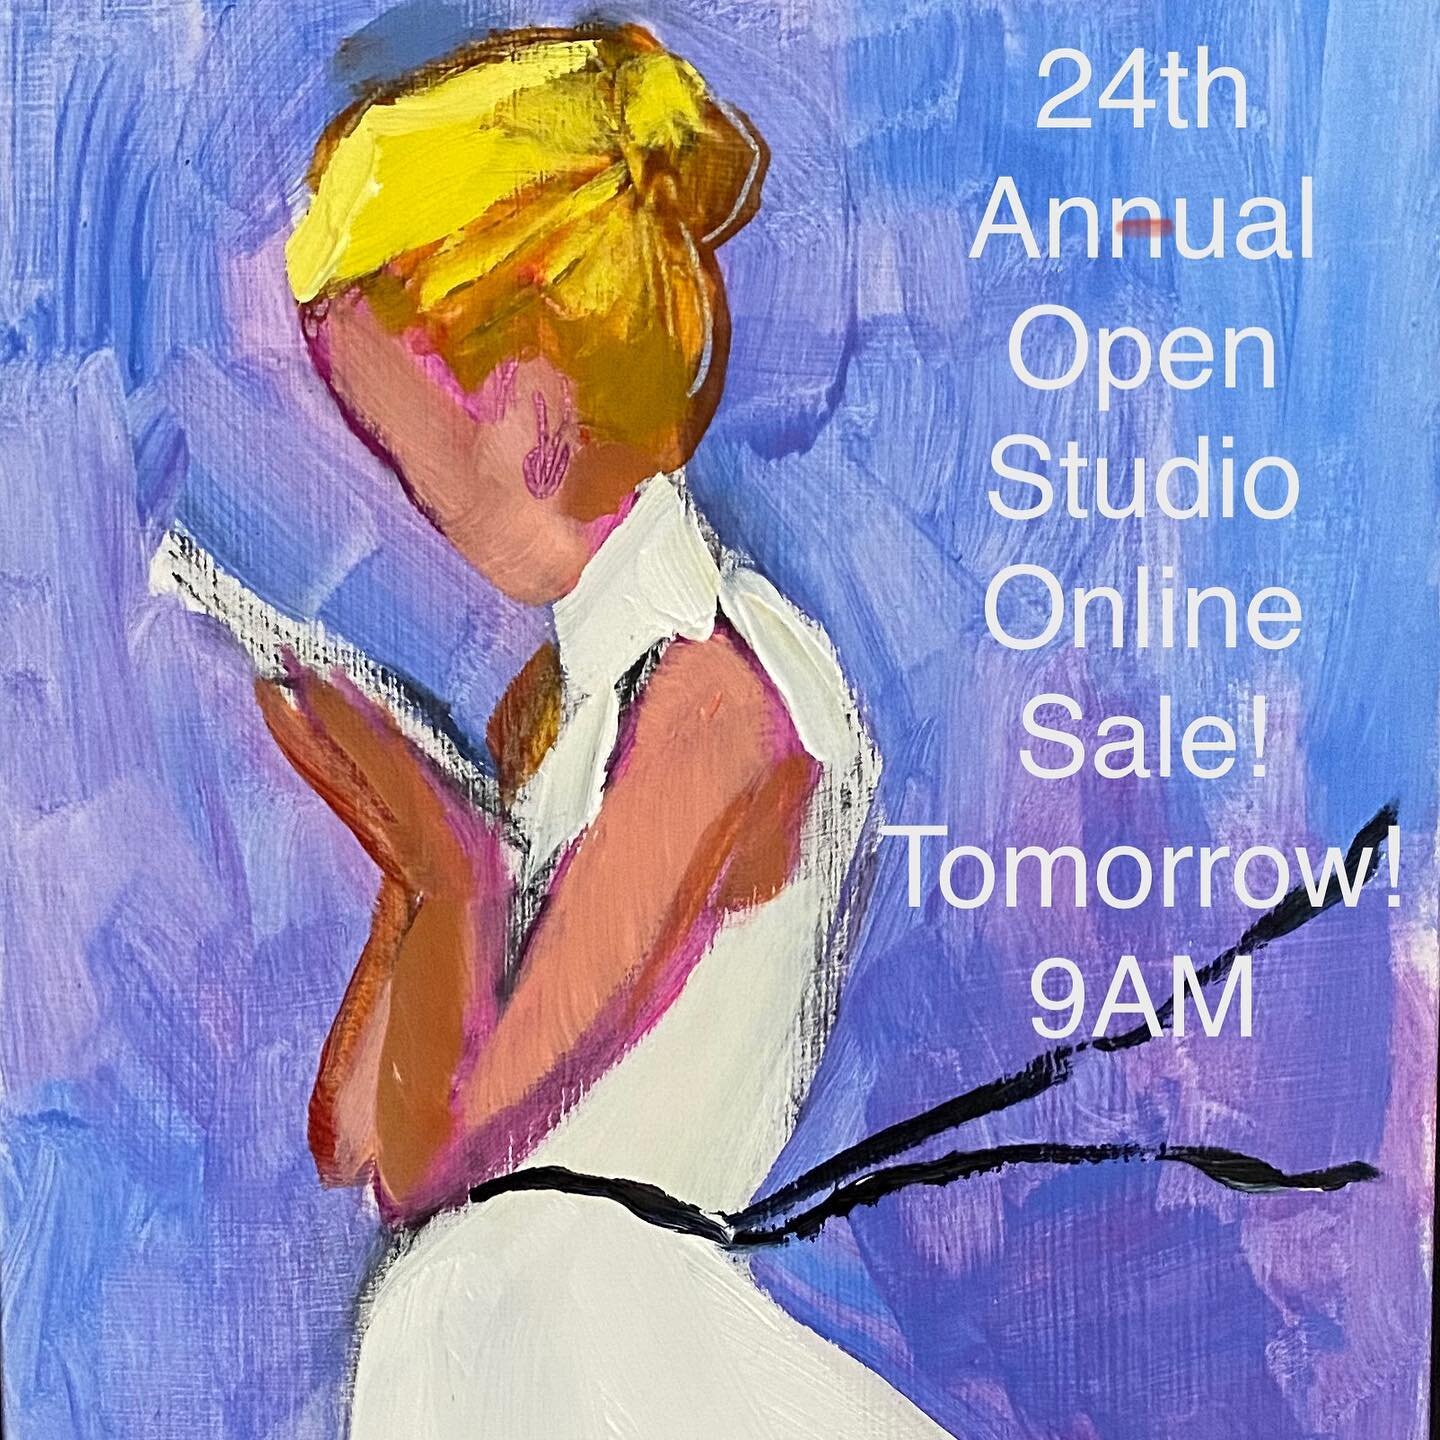 Treat yourself here at the end of this just...year ... new paintings and lots of sale price paintings and everything you need for a cheer up! Hope to have it live at 9 on the dot! Thanks for 23 great years and yes! we will get through this one!!! ❤️❤